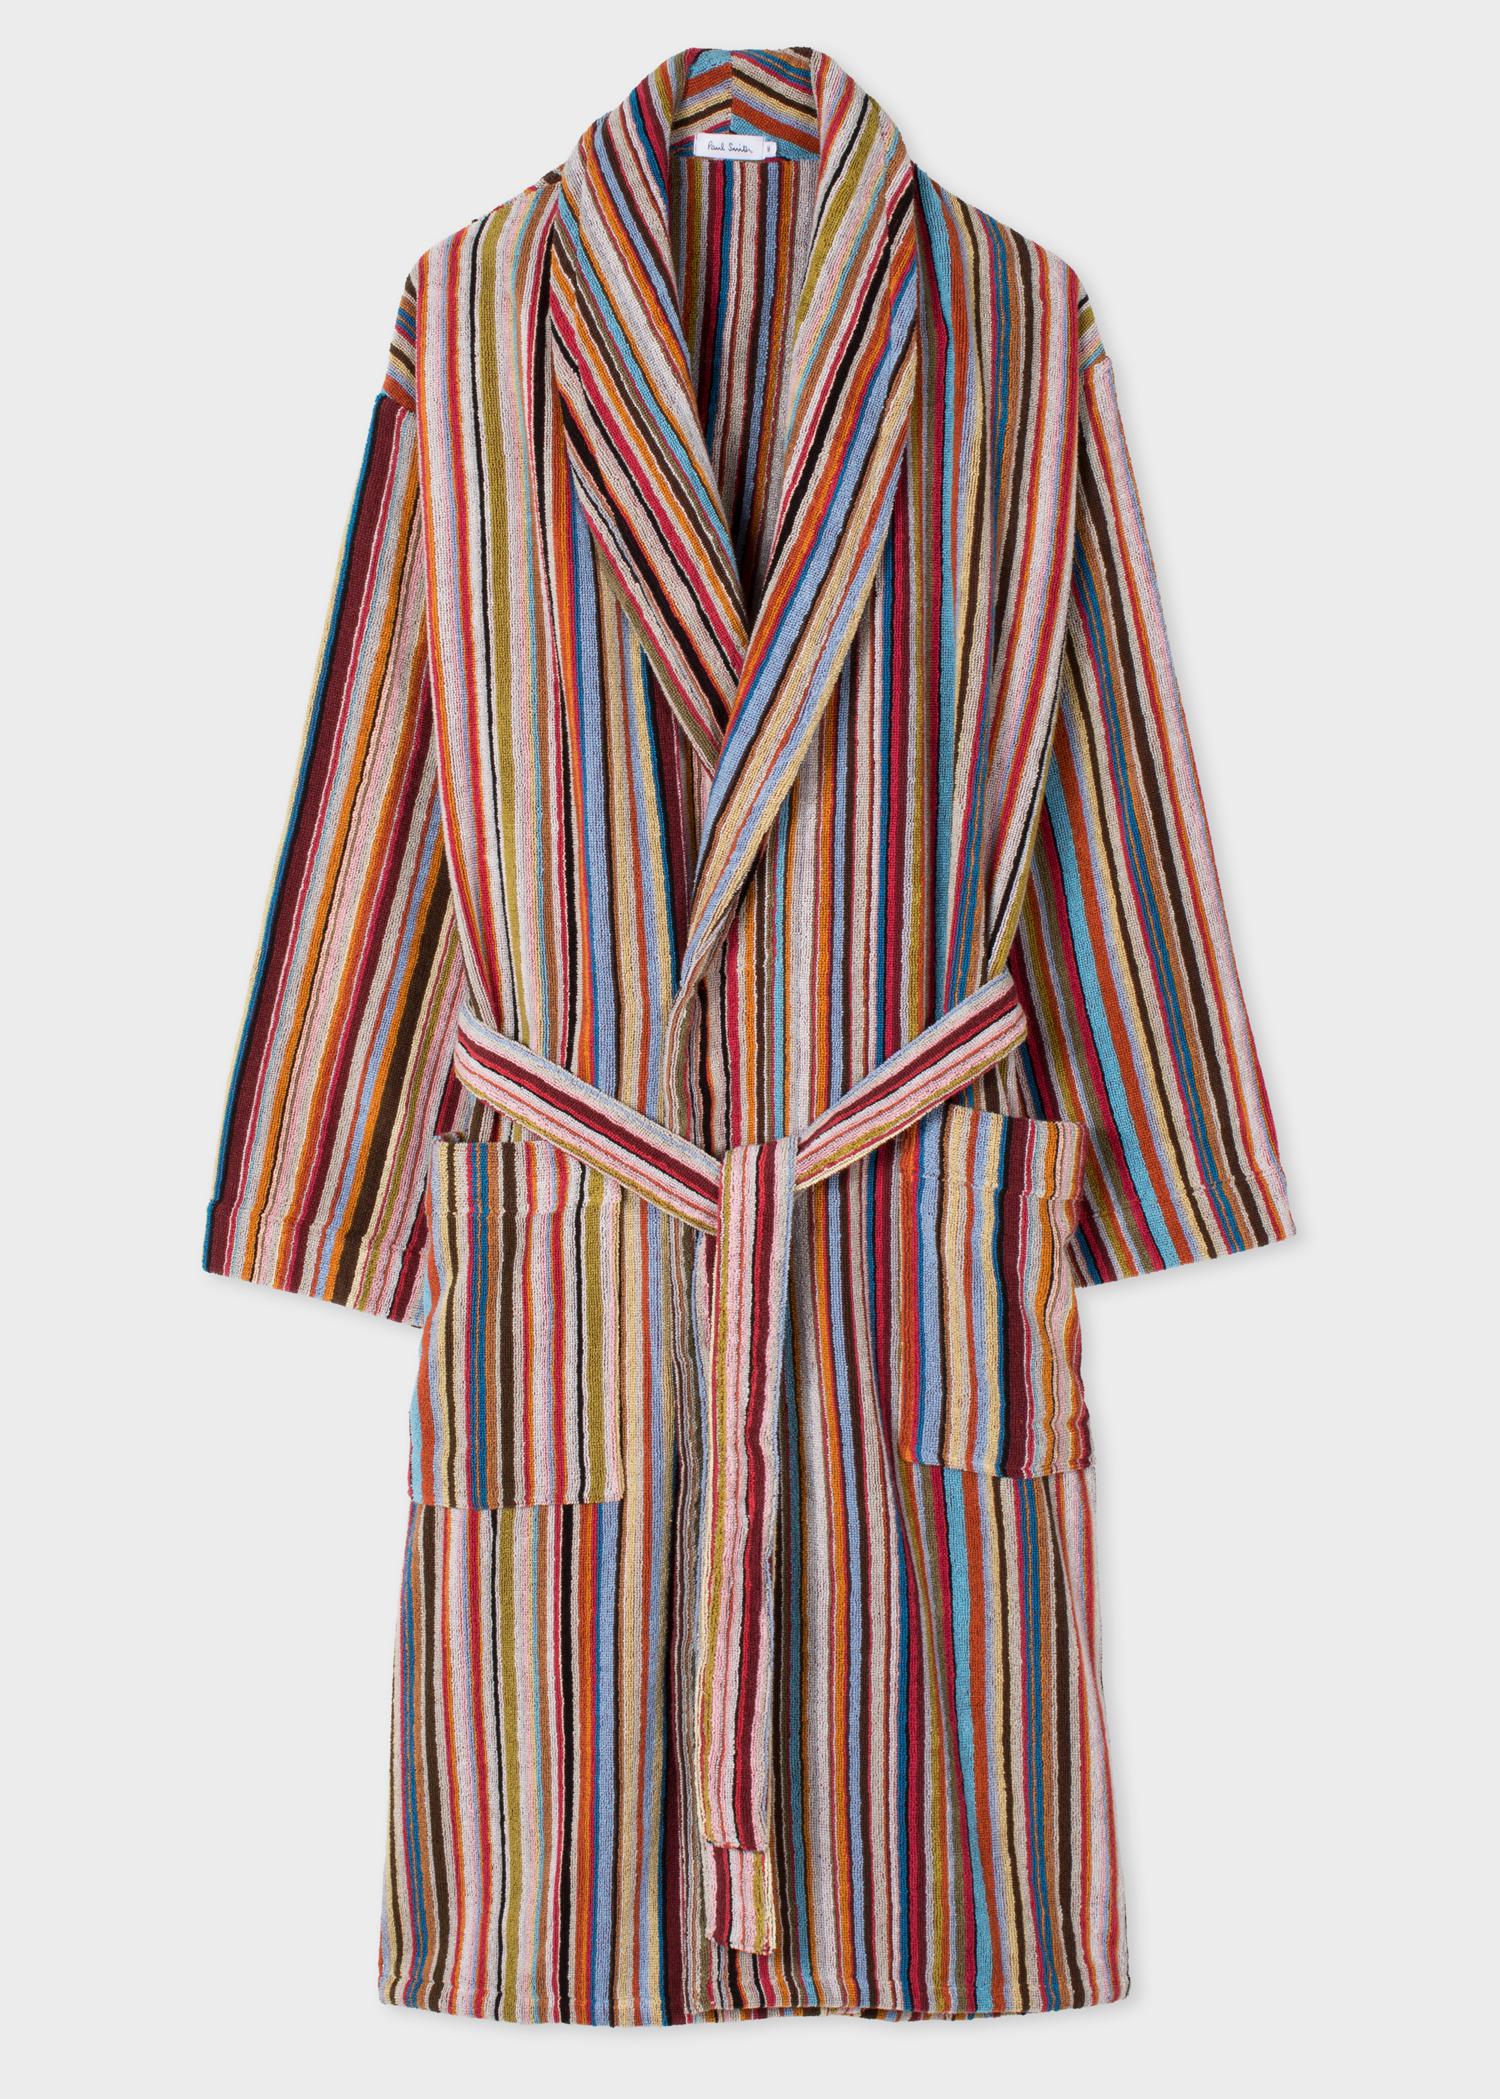 Paul Smith Cotton Multistripe Terry Robe for Men - Lyst